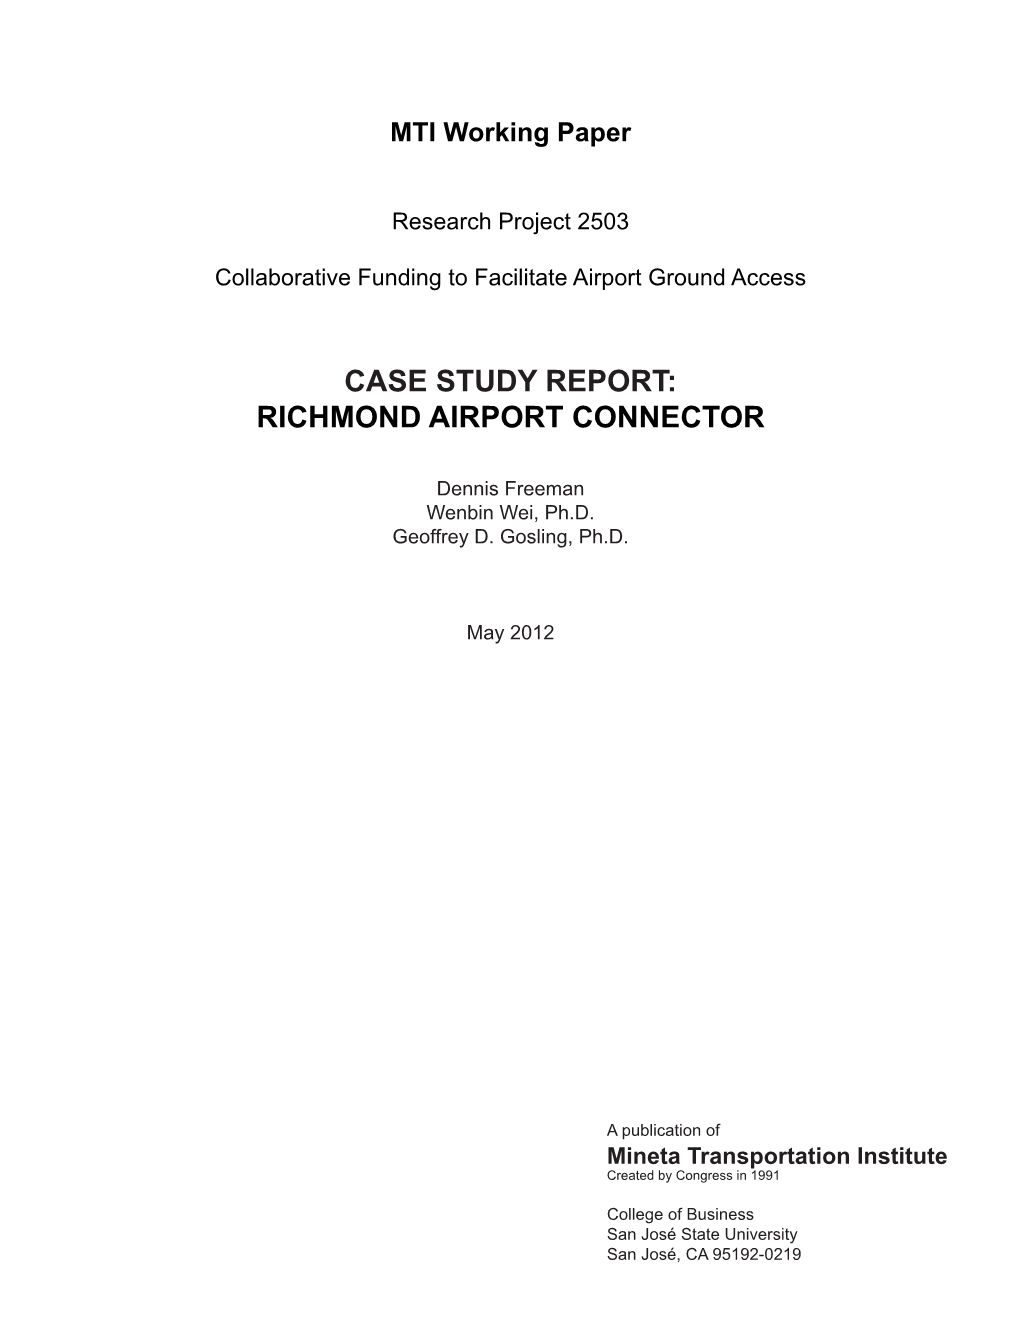 Case Study Report: Richmond Airport Connector